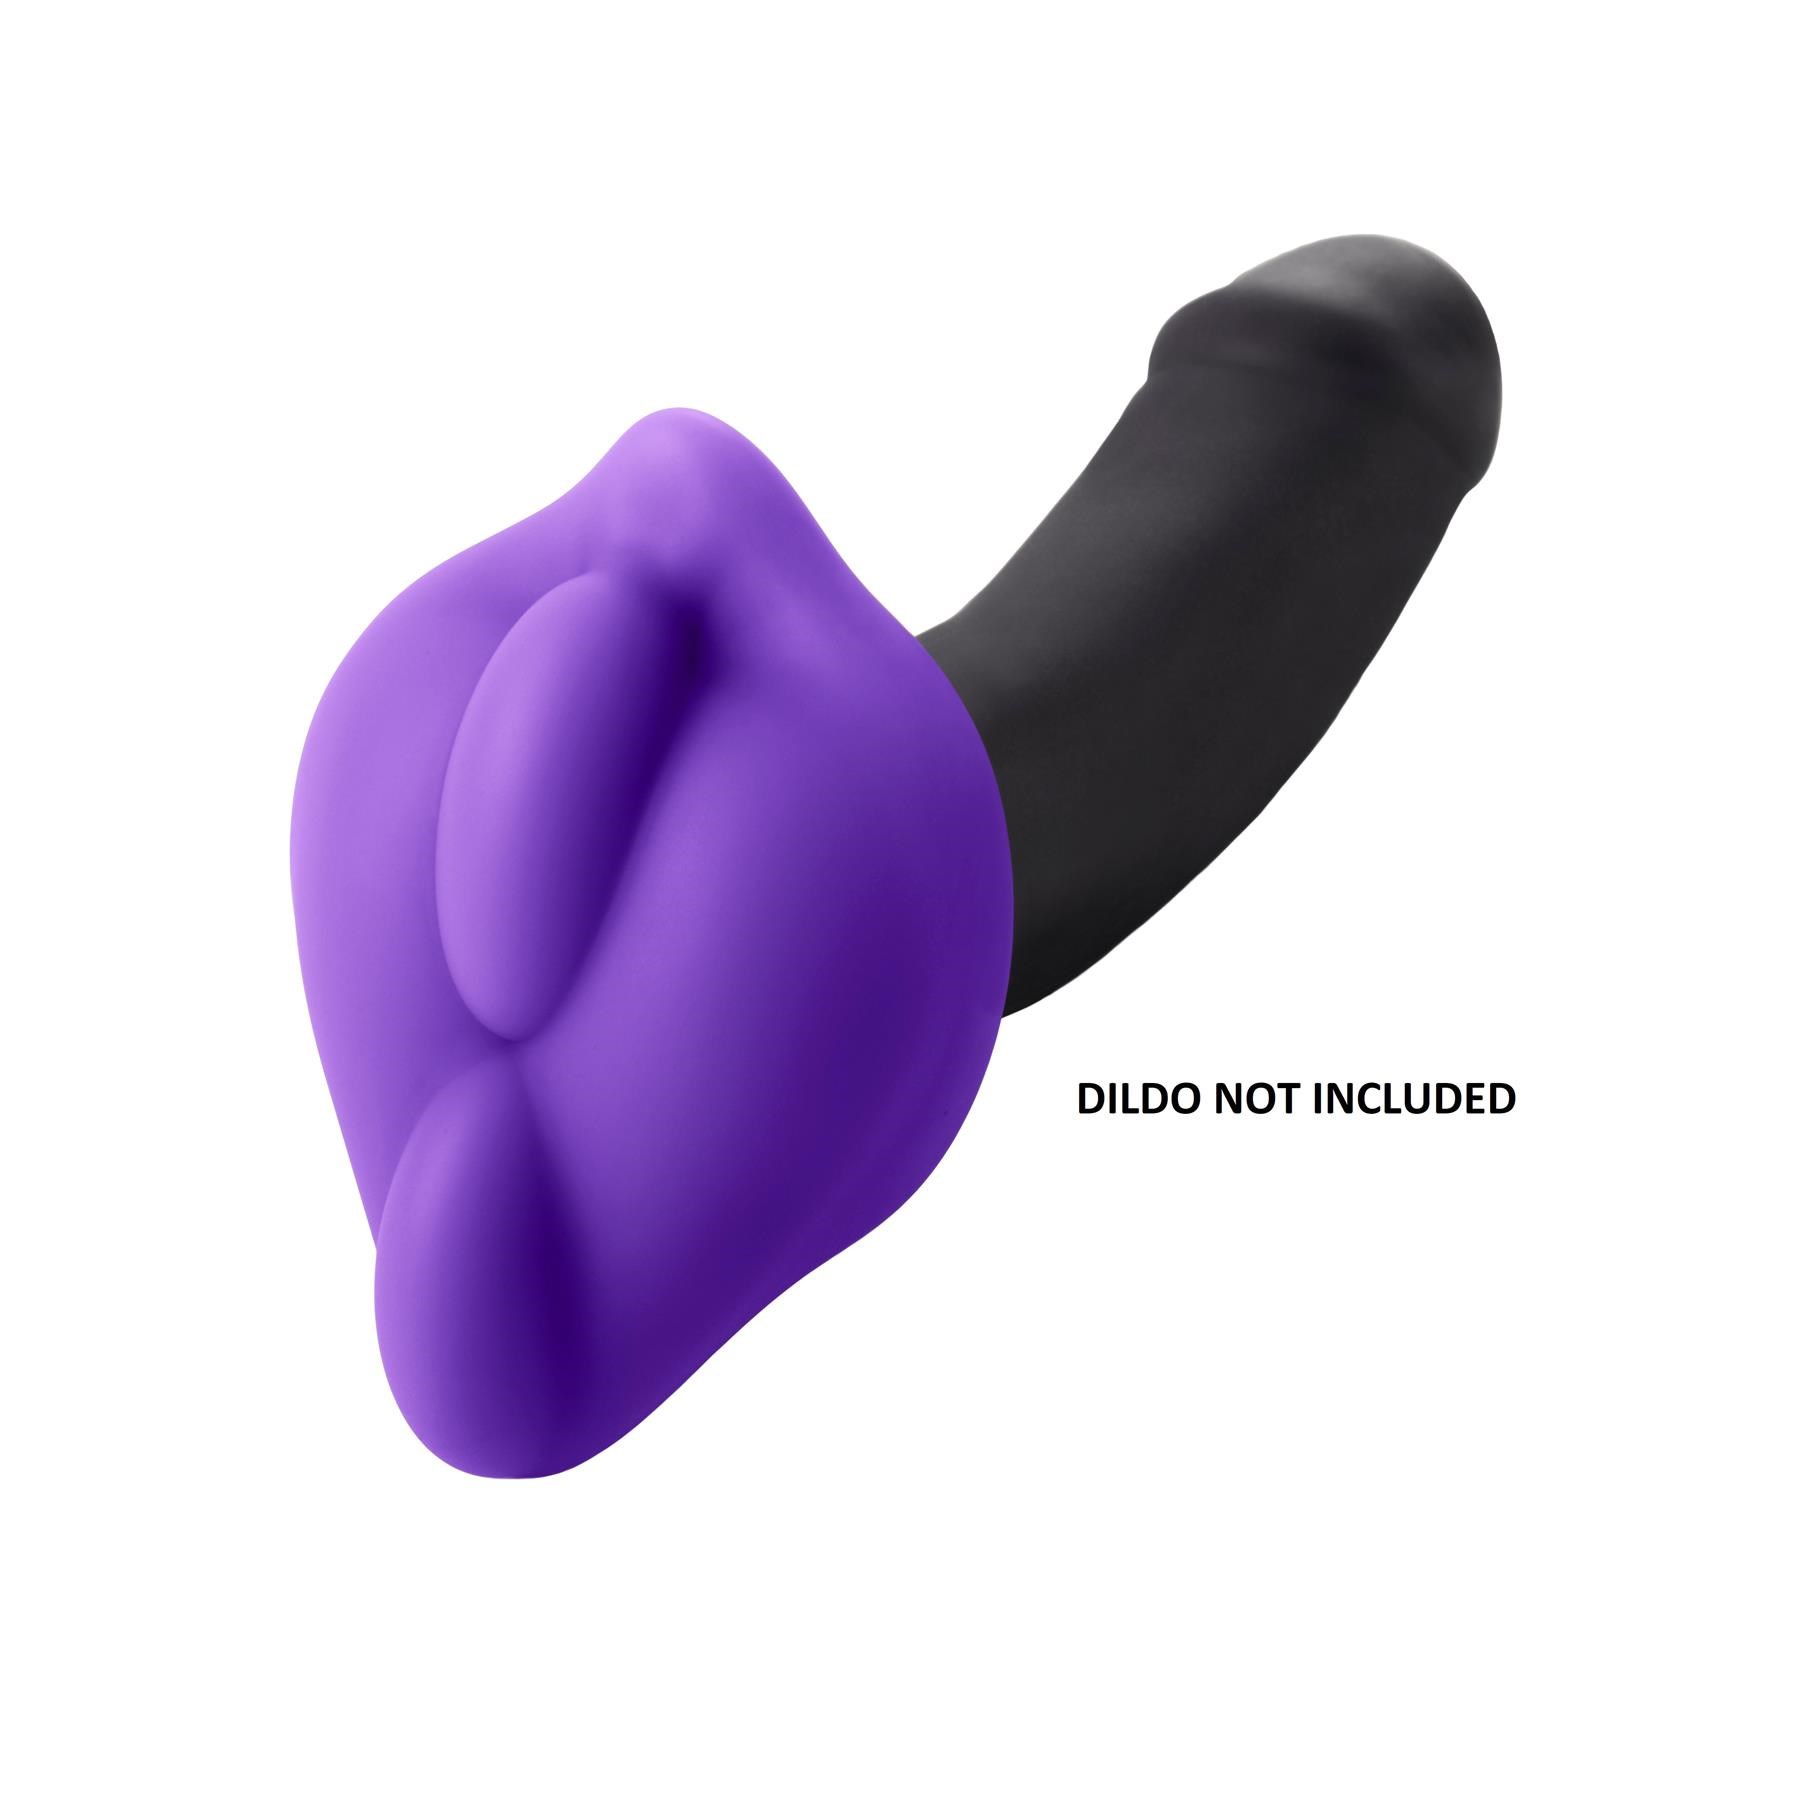 Banana Pants Bumpher Dildo Grinder Cushion - Product Shot with Dildo (Dildo Not Included)